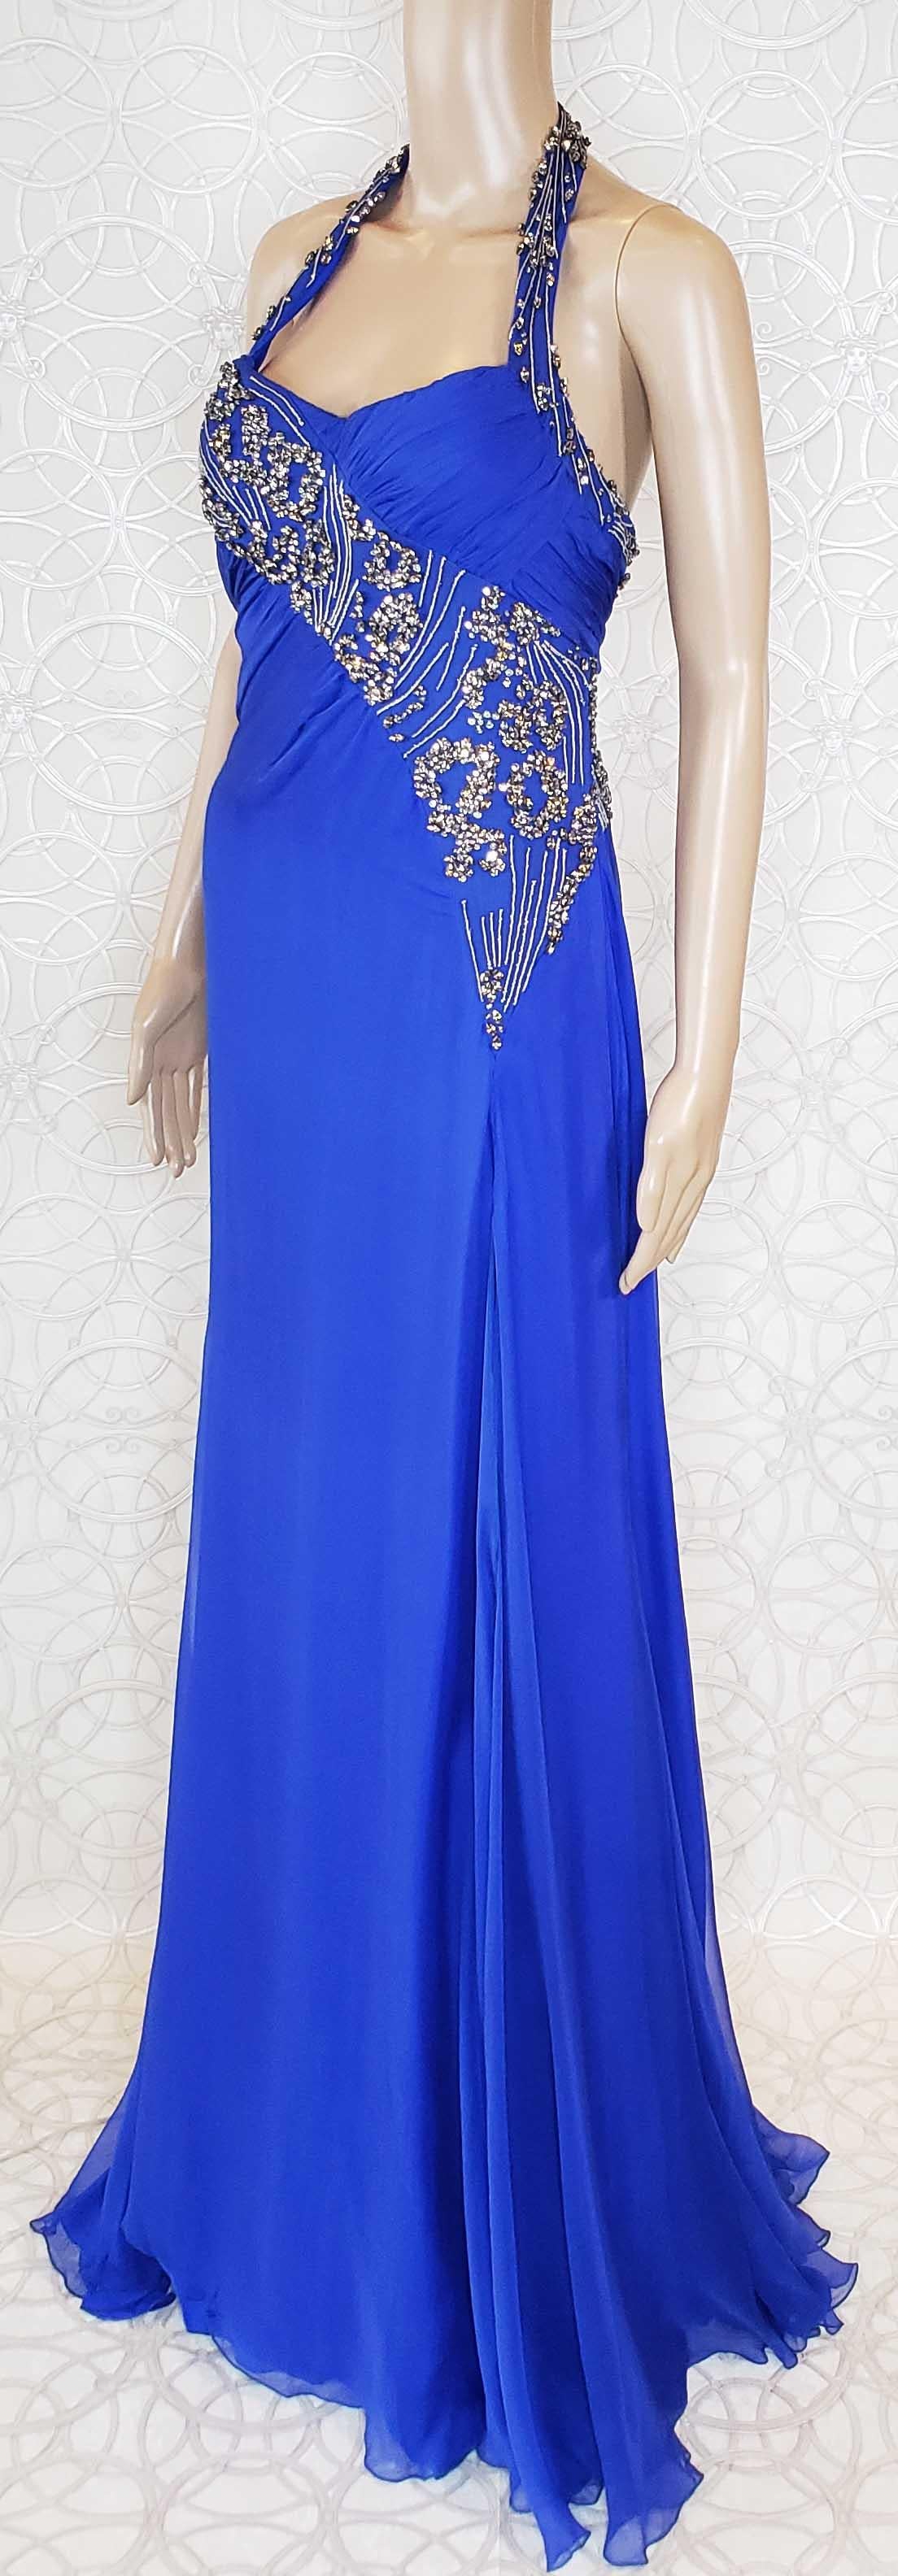 F/W 2009 NEW VERSACE BLUE SILK EMBROIDERED HALTER Gown 42 - 6 For Sale 2